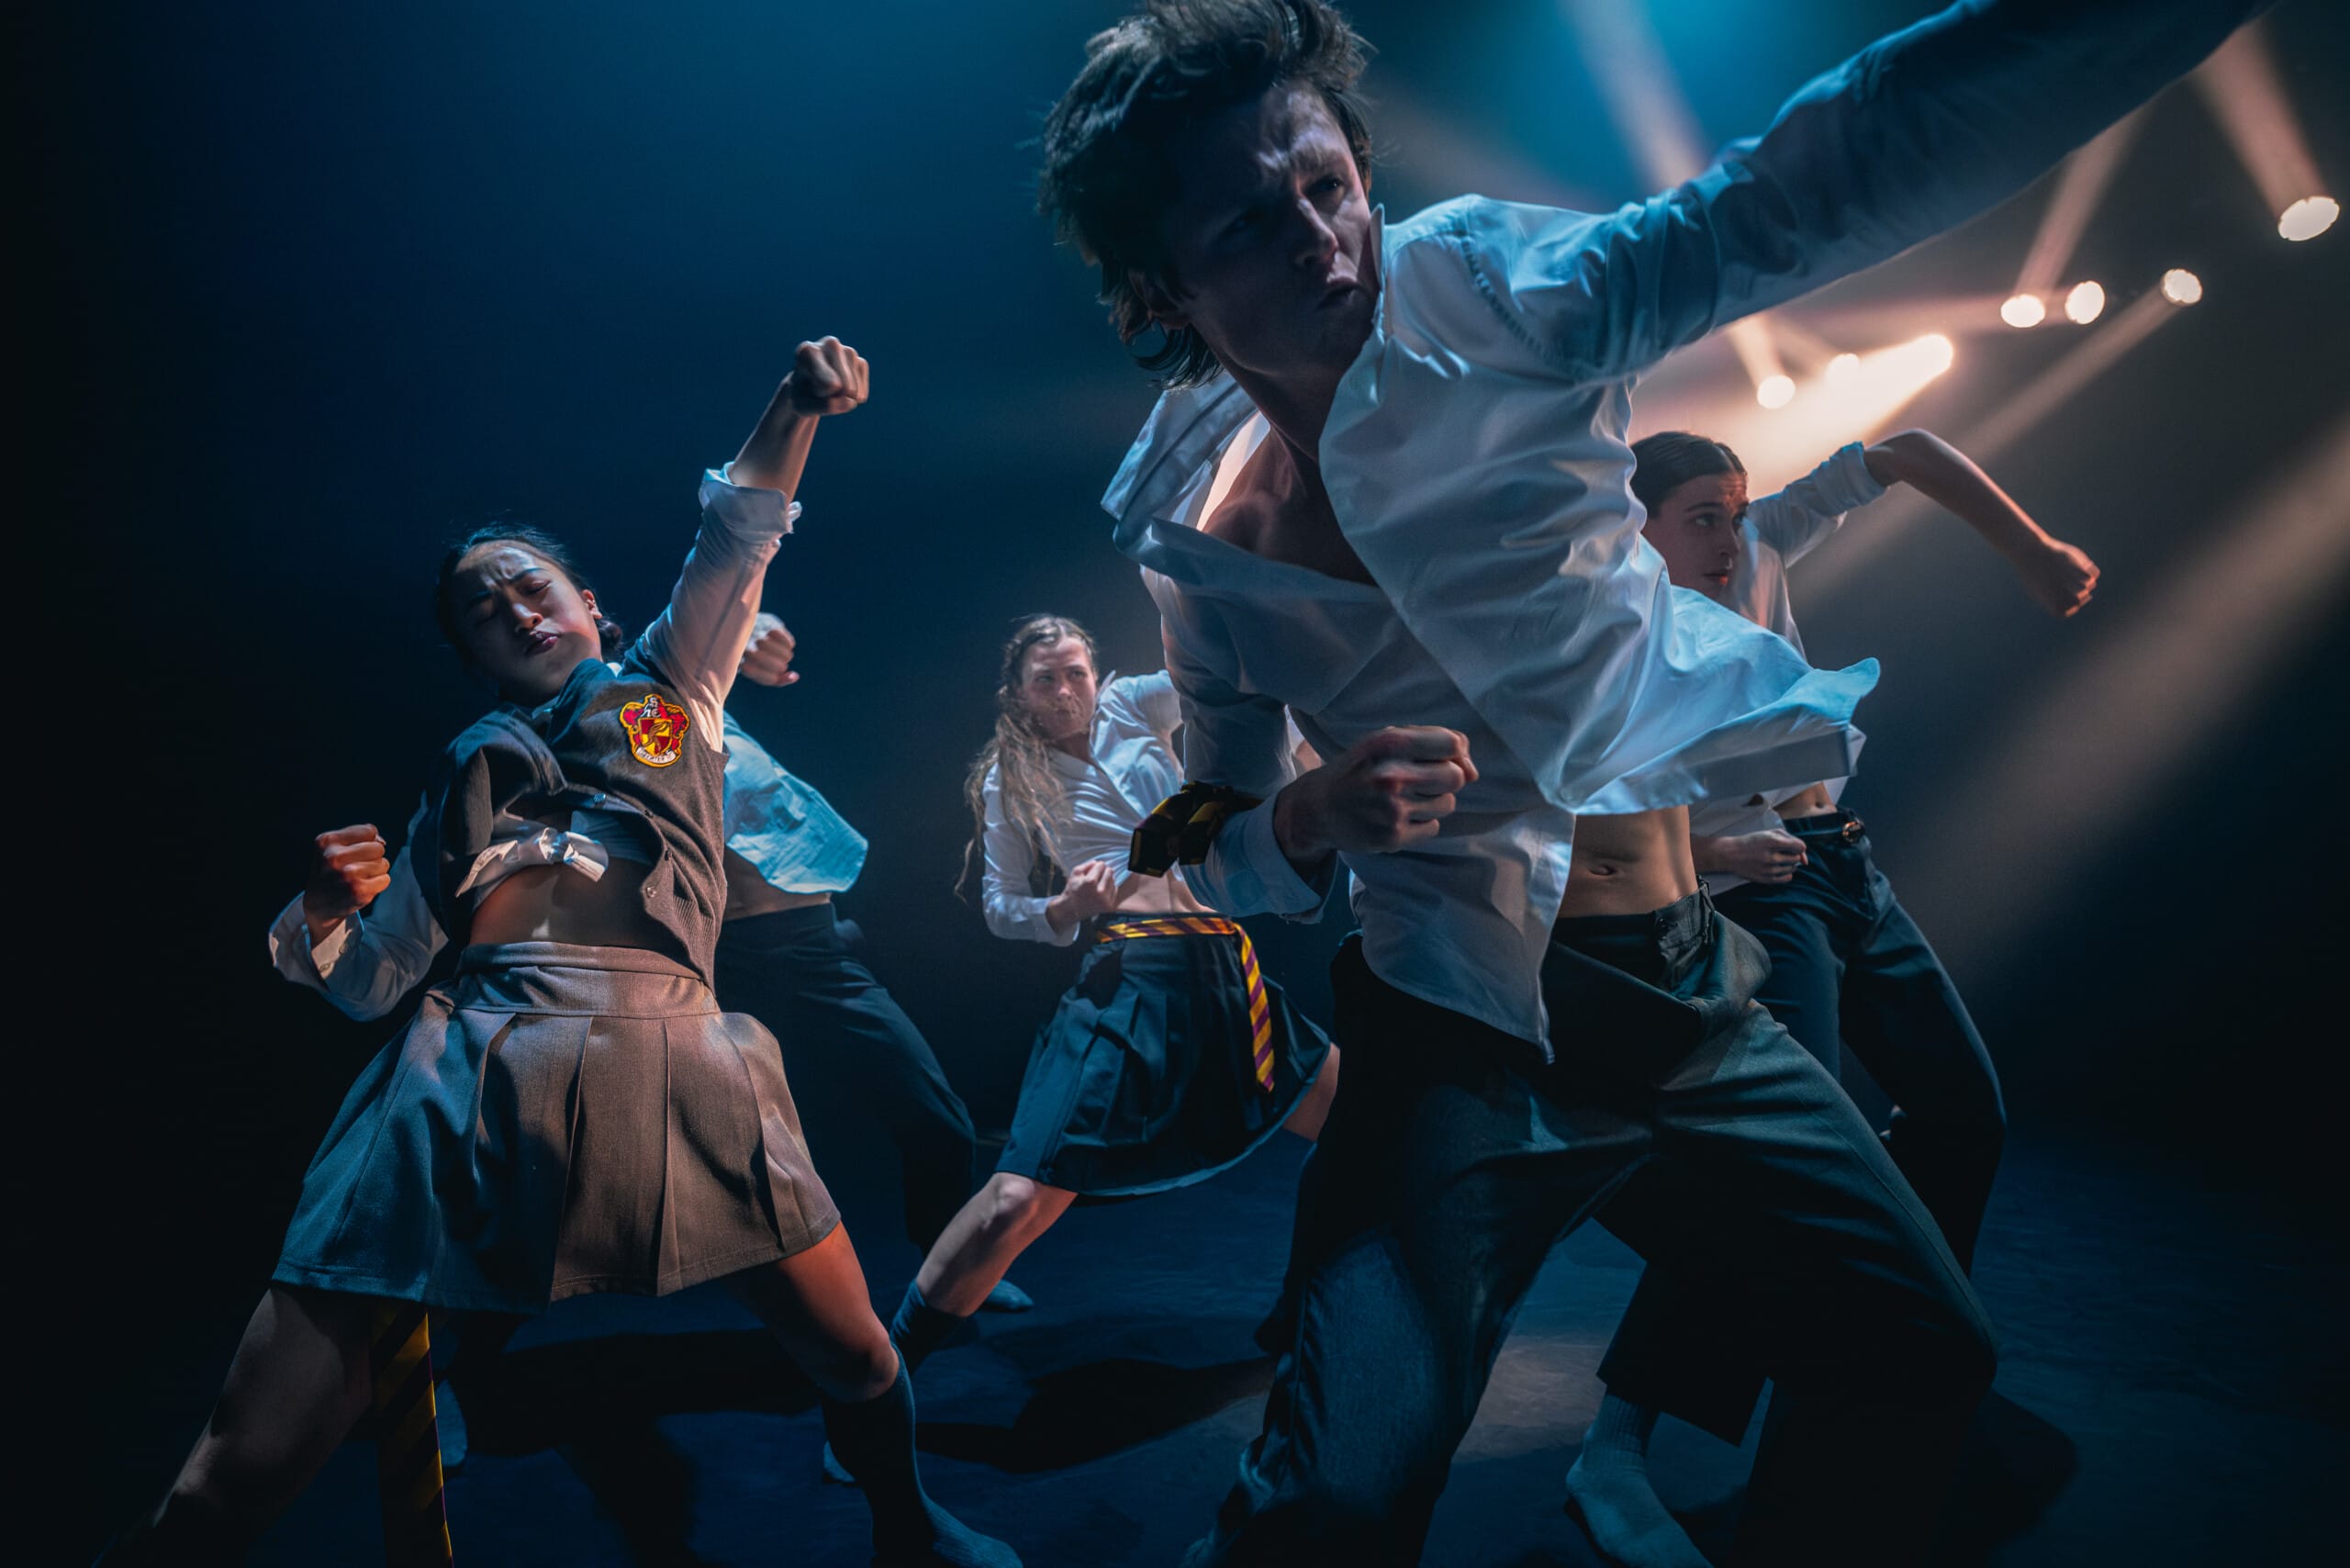 Several Shechter II dances are captured in dynamic poses in a motion shot. In the foreground, a male dancer punches the air with passion. All dancers wear contemporary, school uniform inspired costumes.